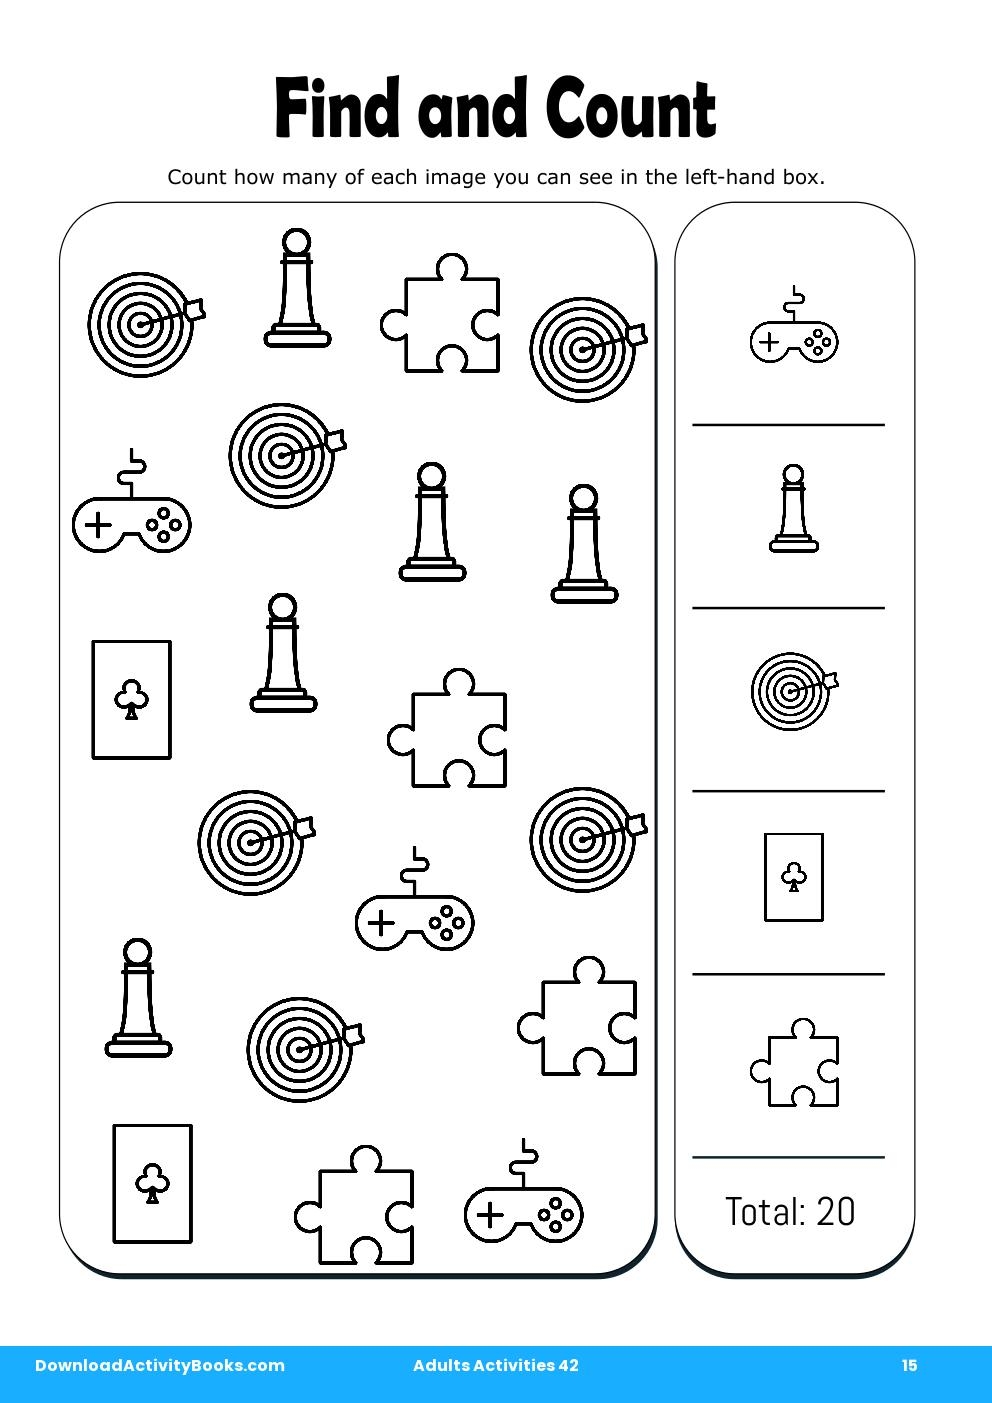 Find and Count in Adults Activities 42